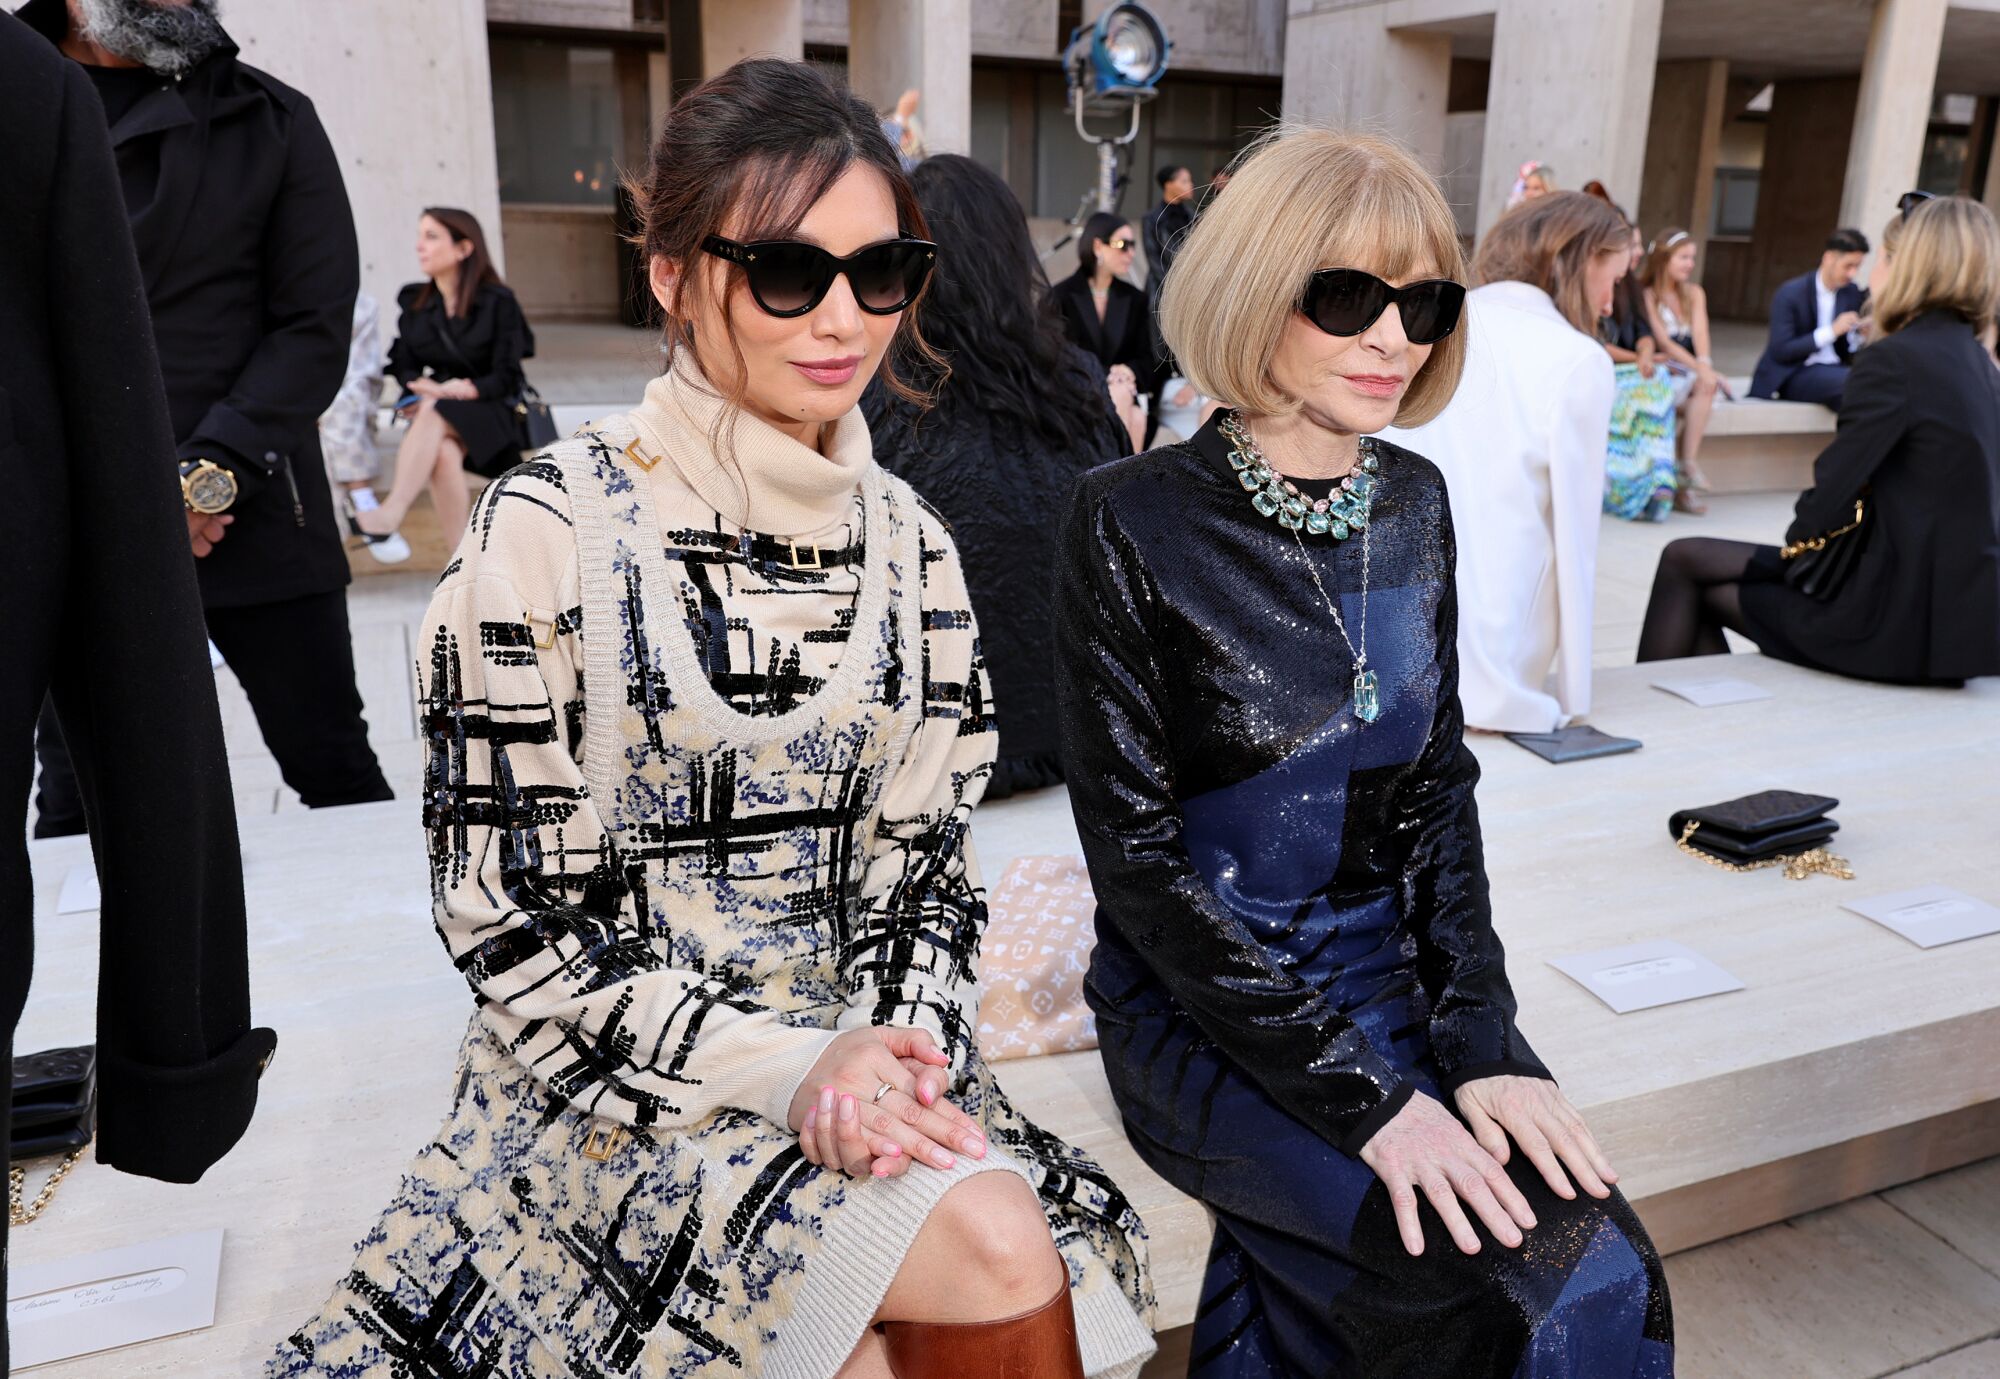 Gemma Chan and Anna Wintour attend Louis Vuitton's 2023 Cruise show on May 12, 2022, at the Salk Institute.